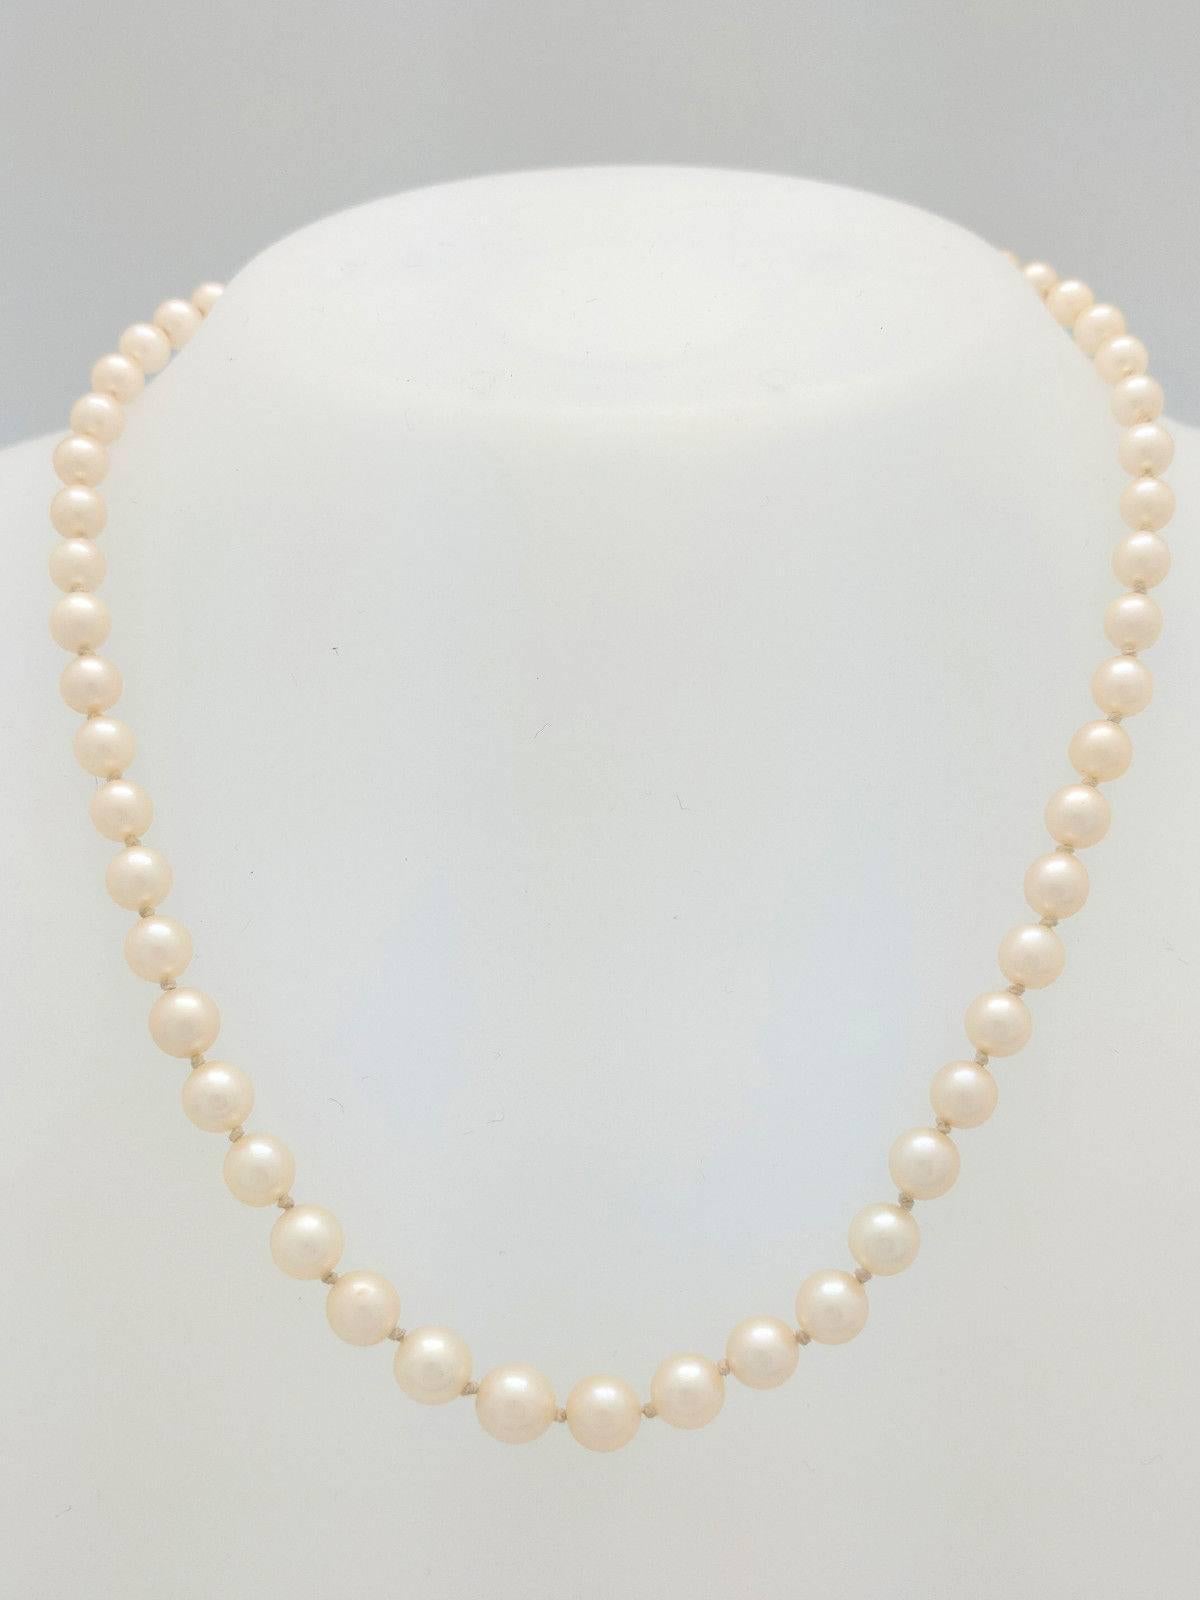 14K White Gold 4mm-6mm Graduating Cultured Pearl Necklace 15